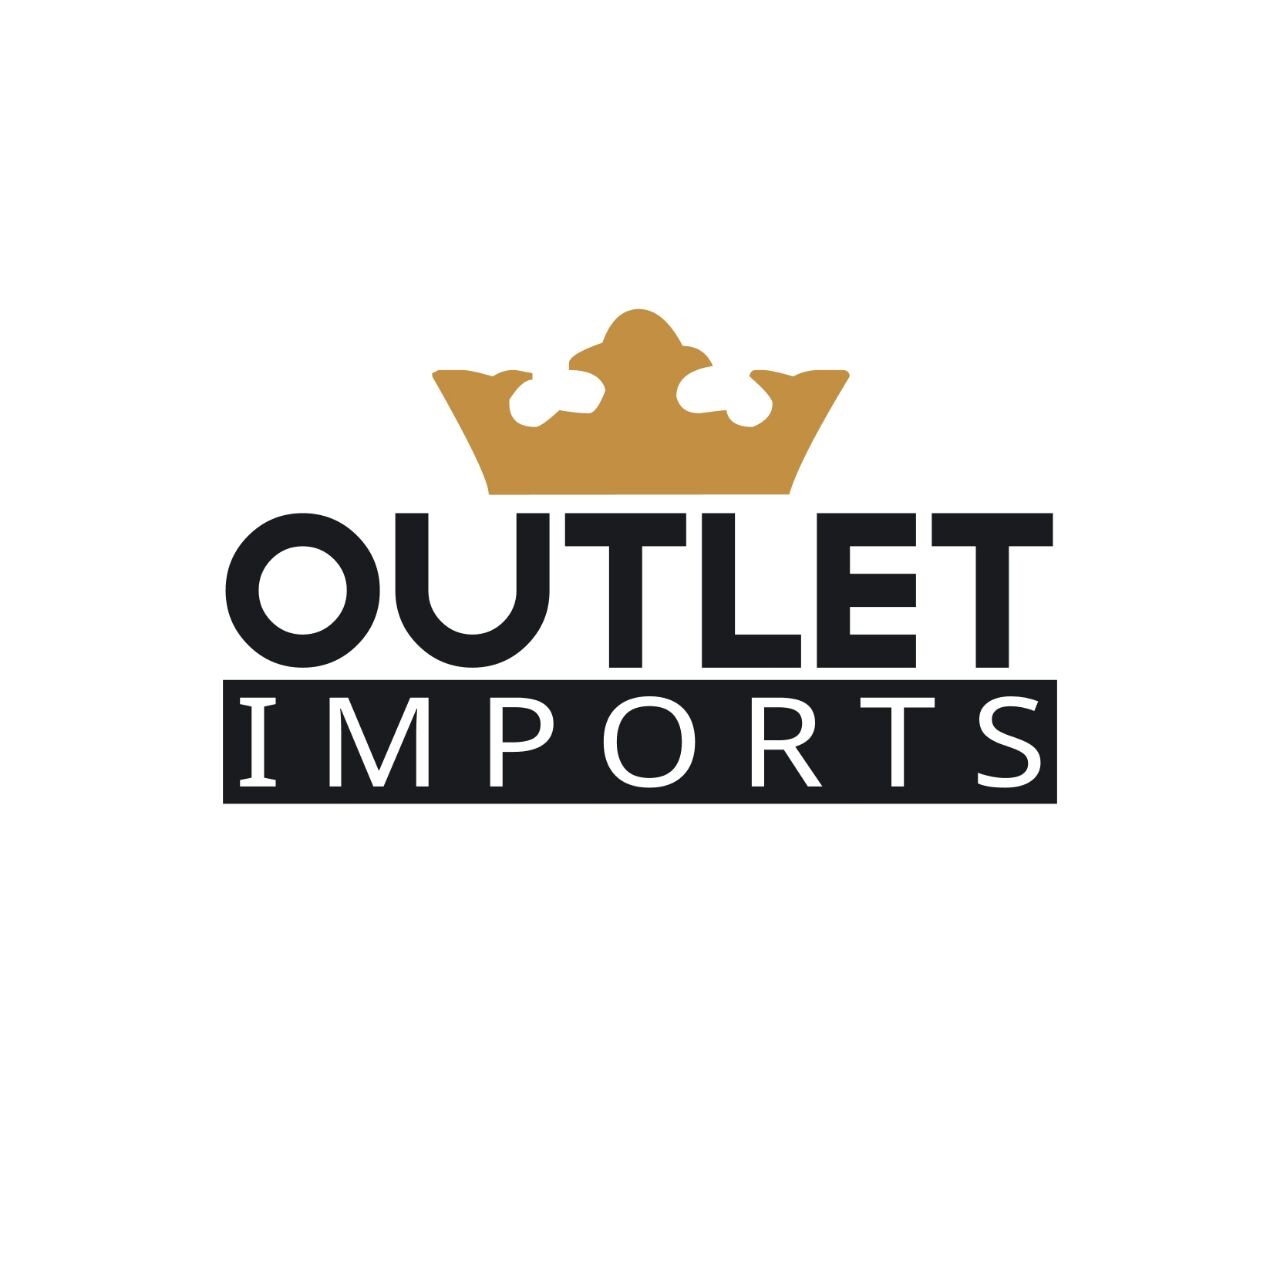 Outlet Imports